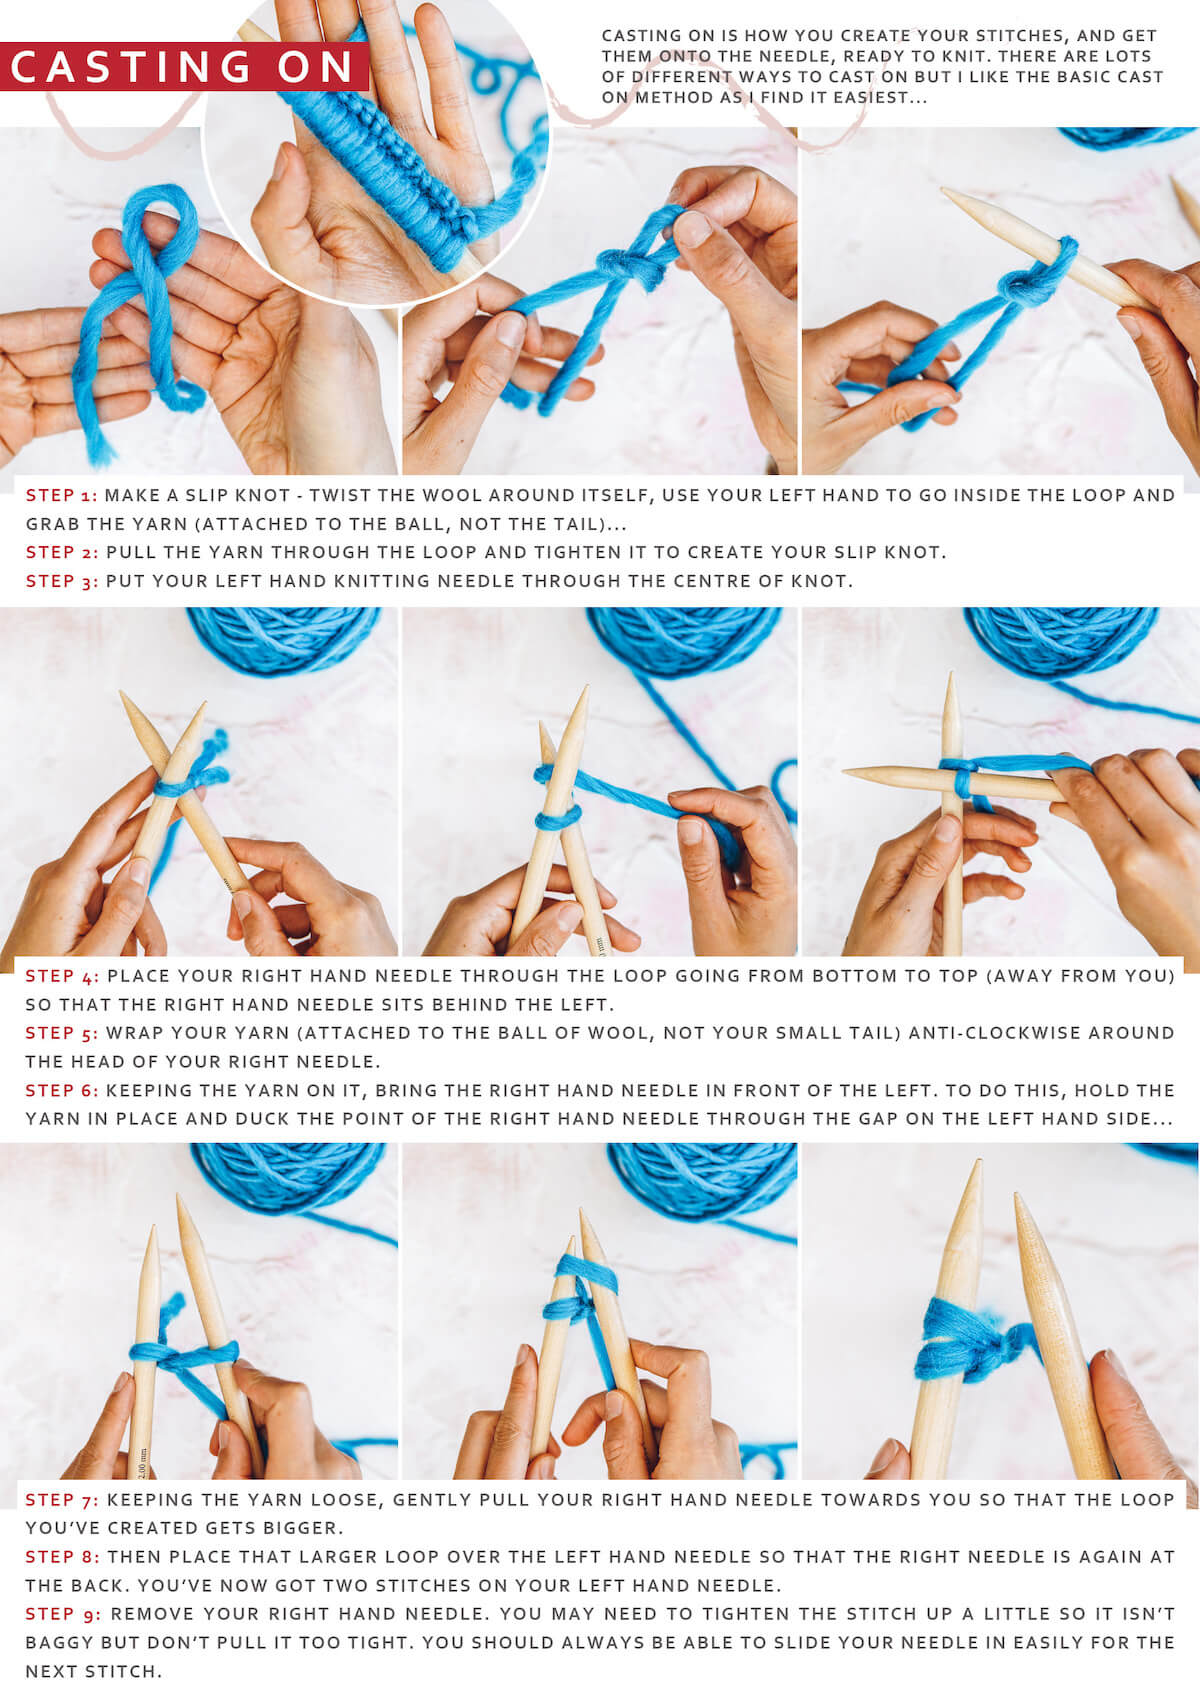 How to knit for beginners - Step-by-step tutorial with the basics [+video]